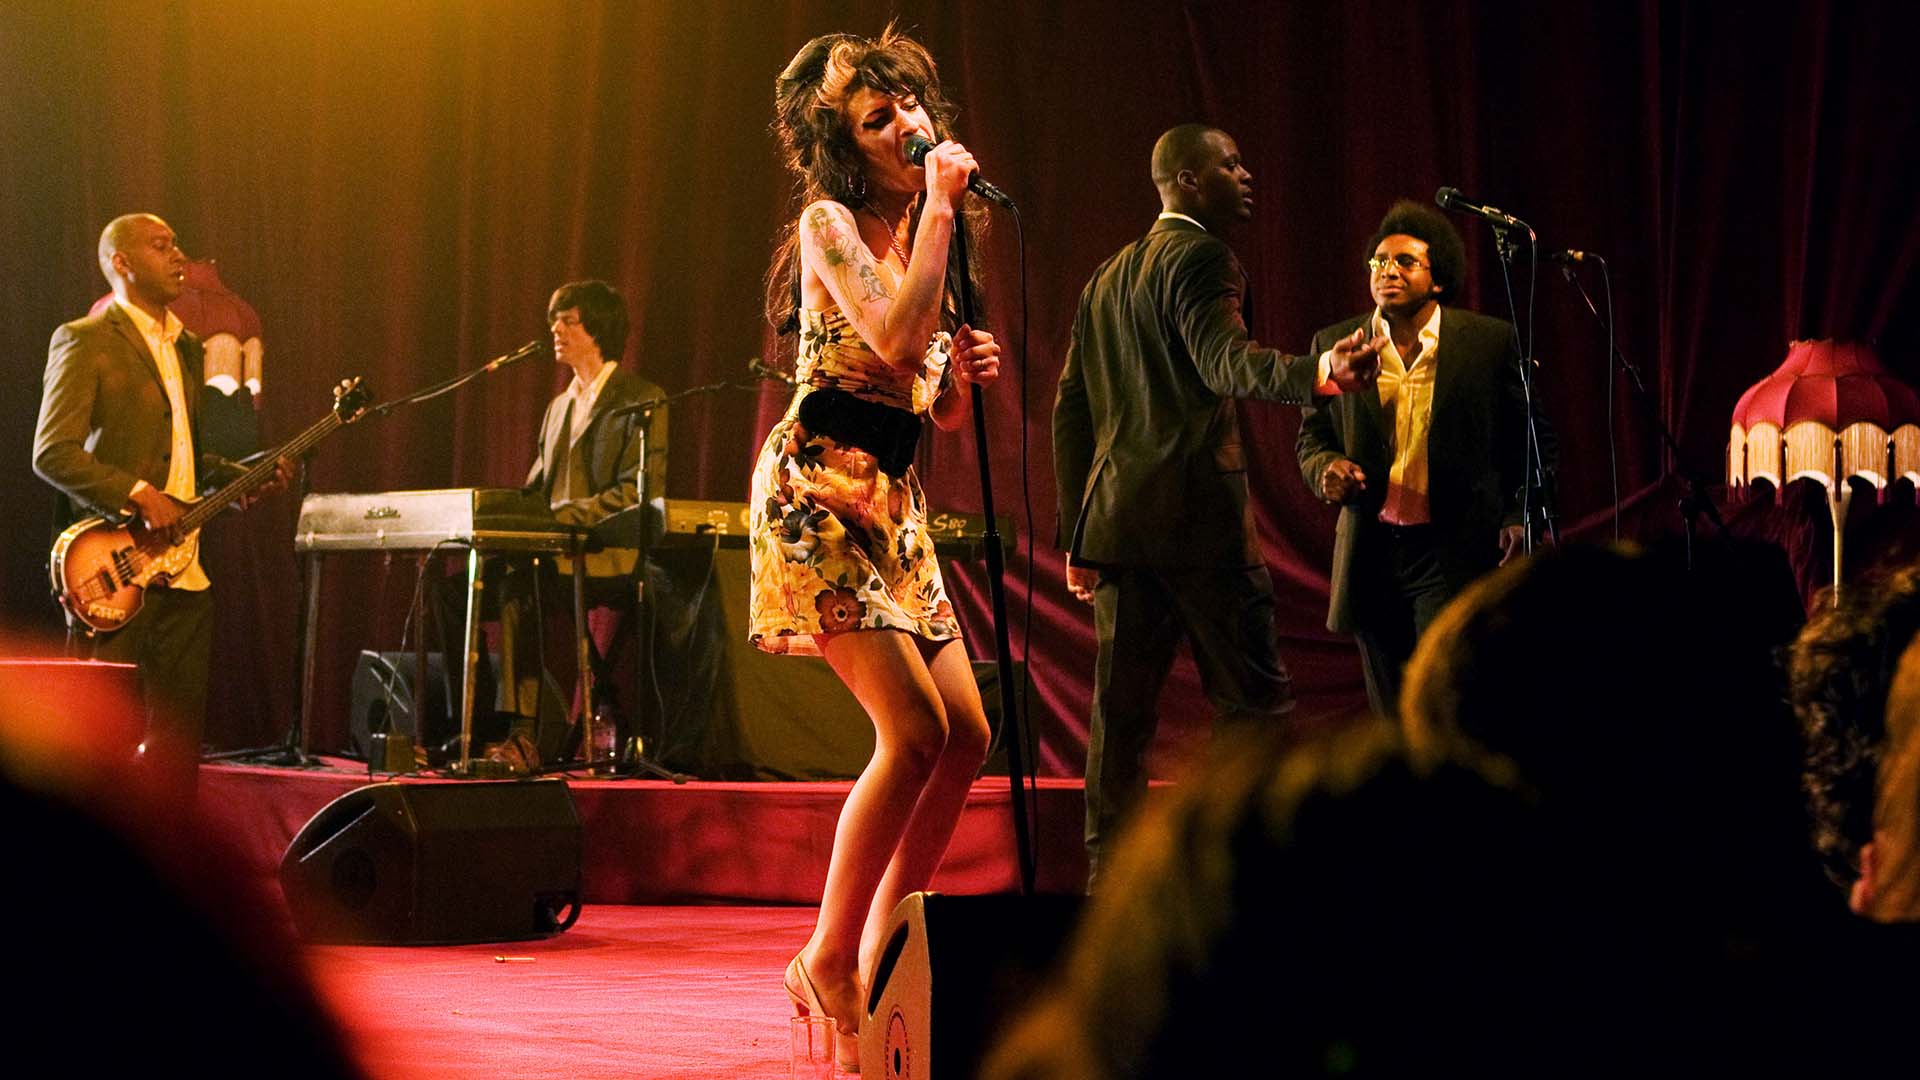 Amy Winehouse singing into a microphone, surrounded by musicians on a stage